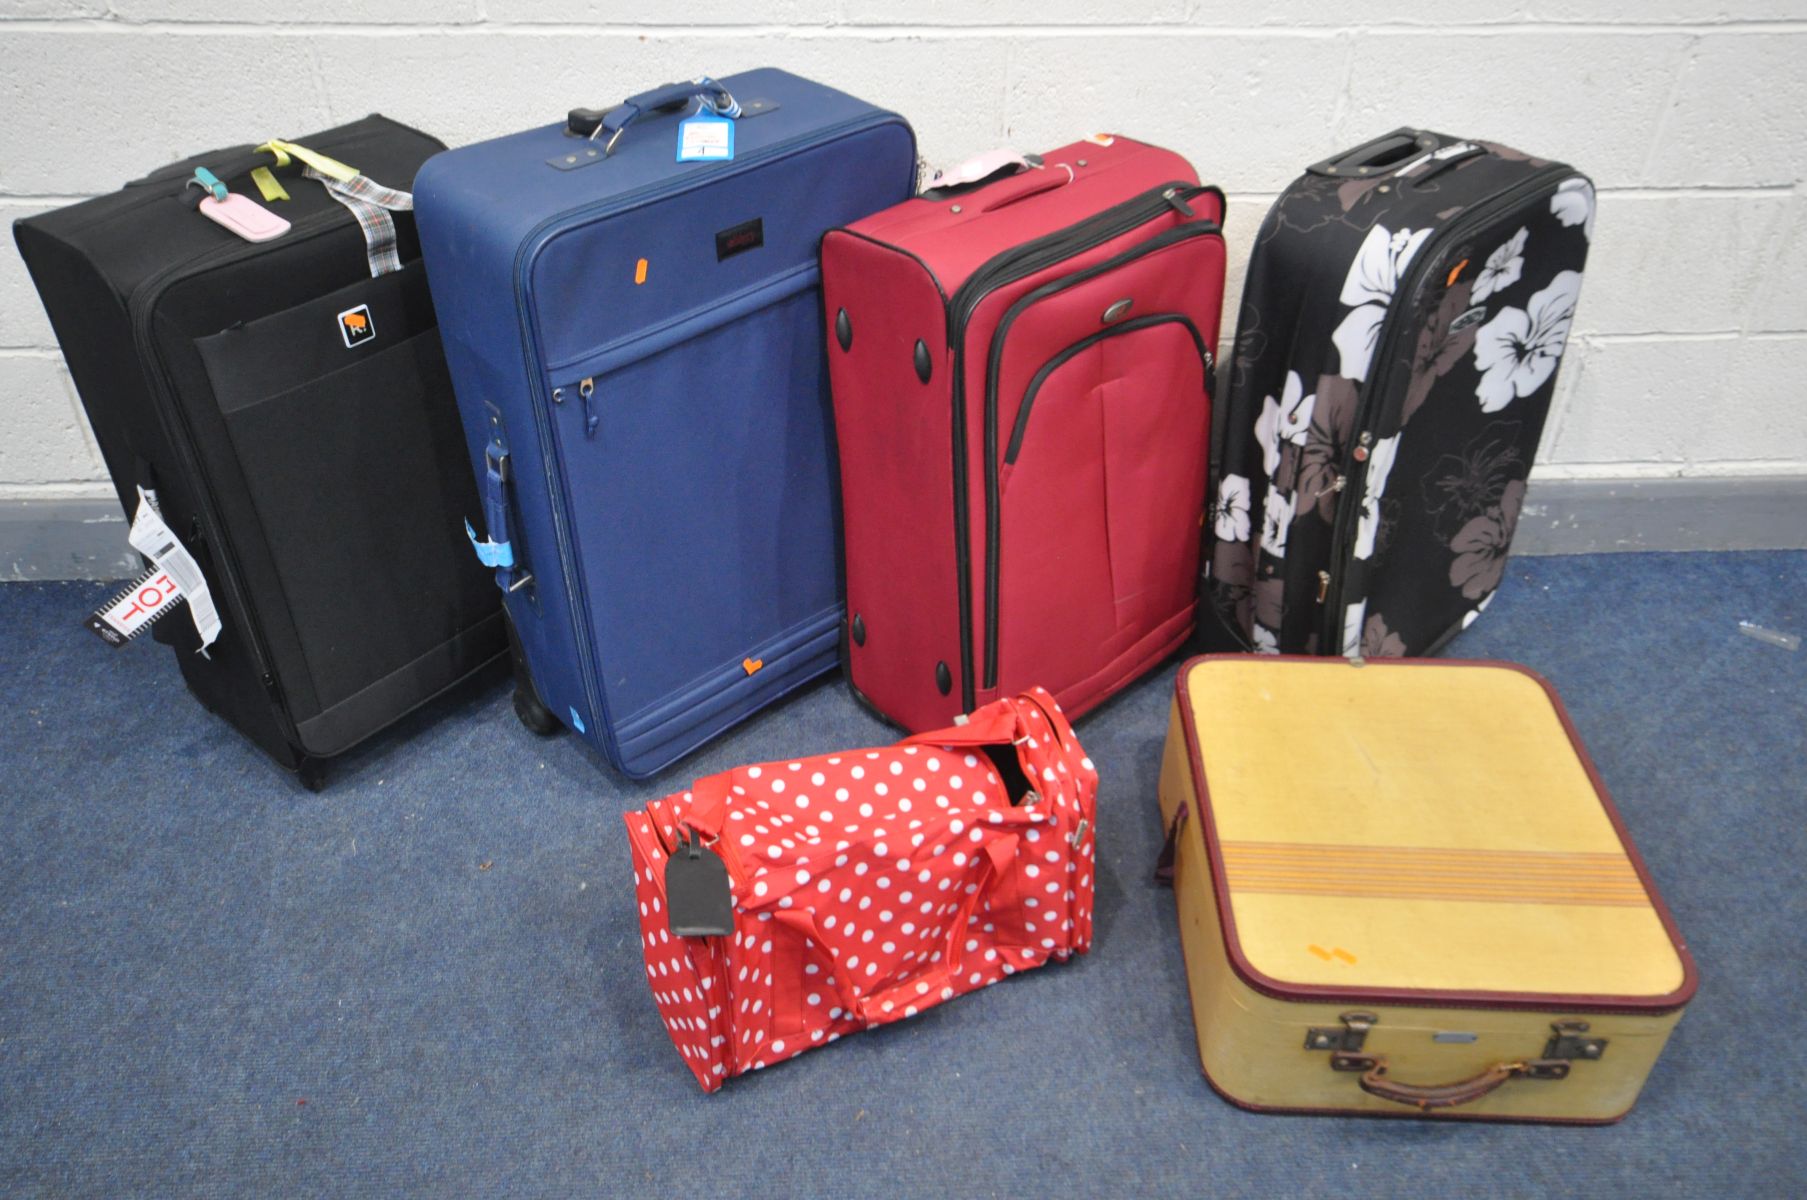 SIX VARIOUS SUITCASES, including a mid-century suitcase, labelled Airport lightweight luggage